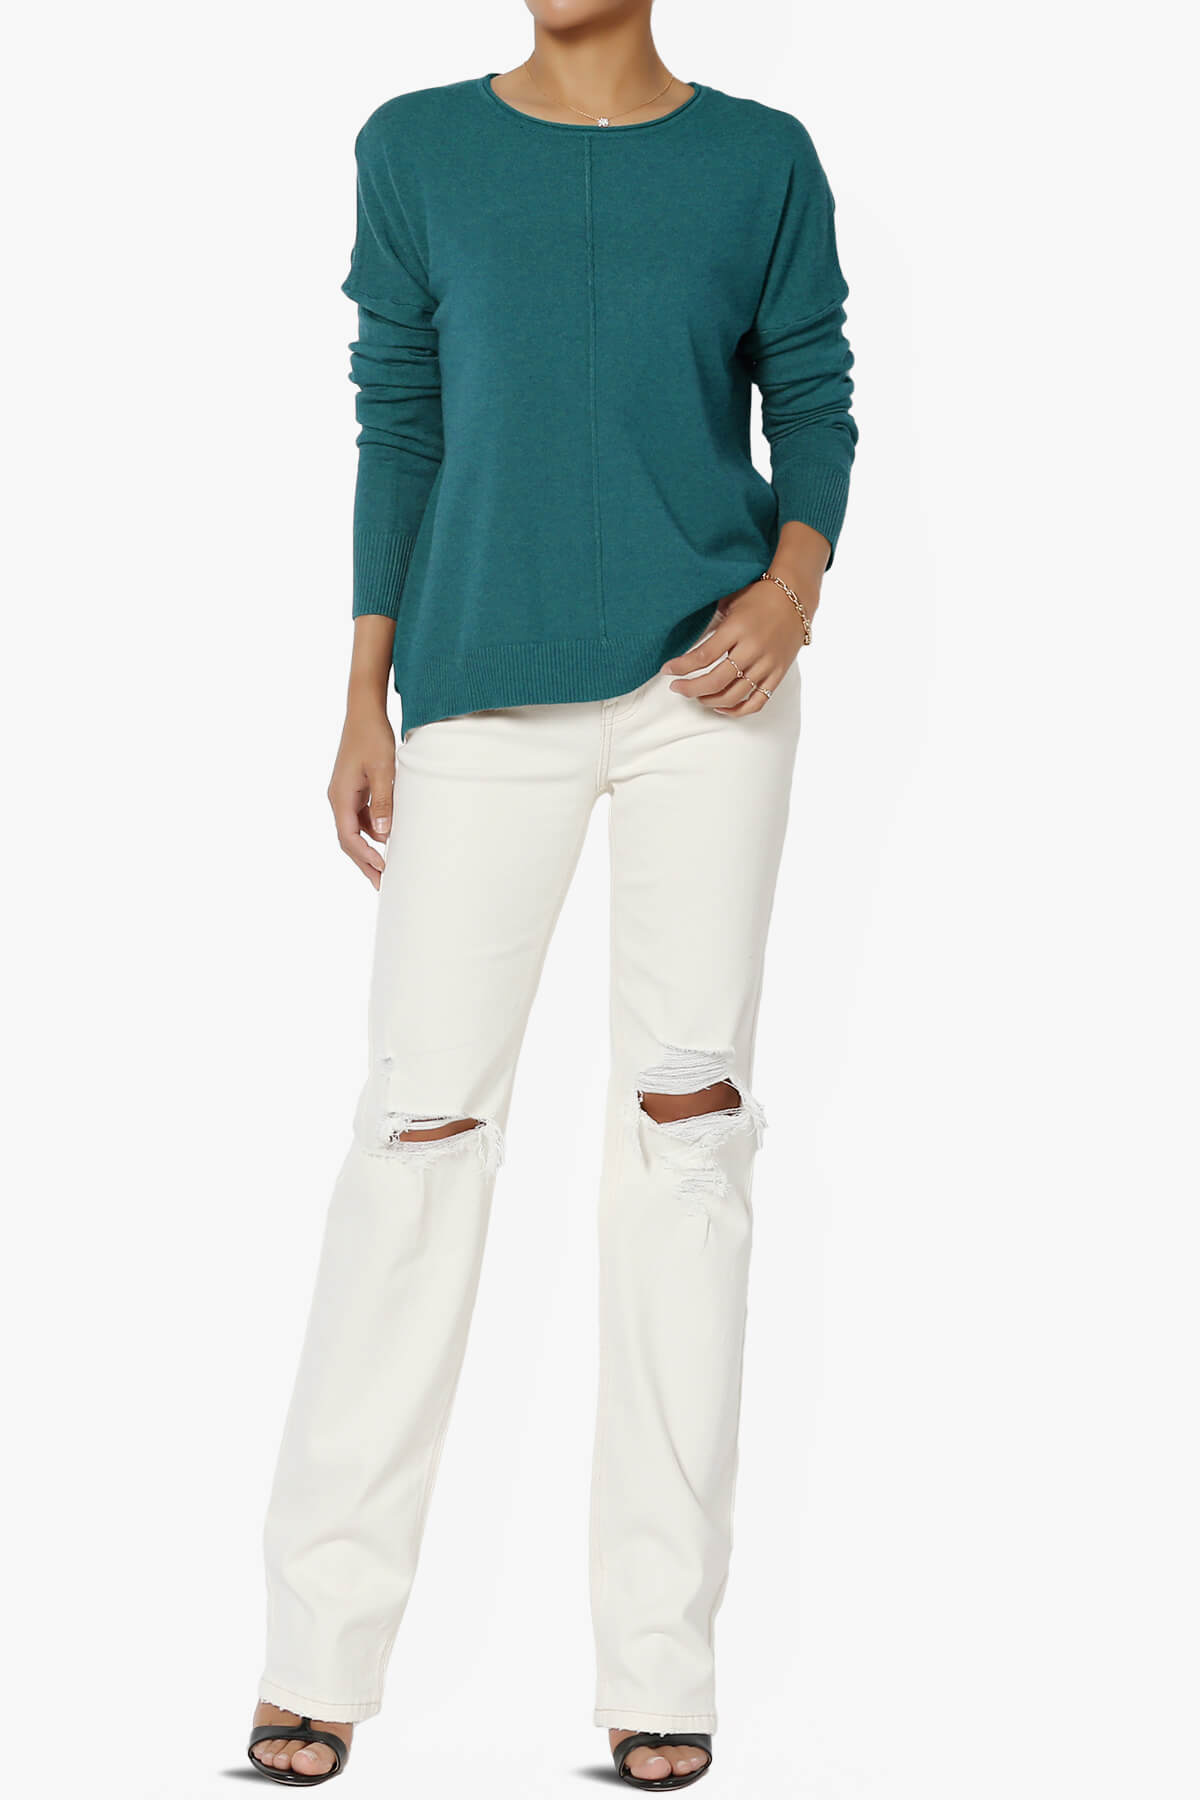 Carolina Long Sleeve Relaxed Fit Knit Top OCEAN TEAL_6